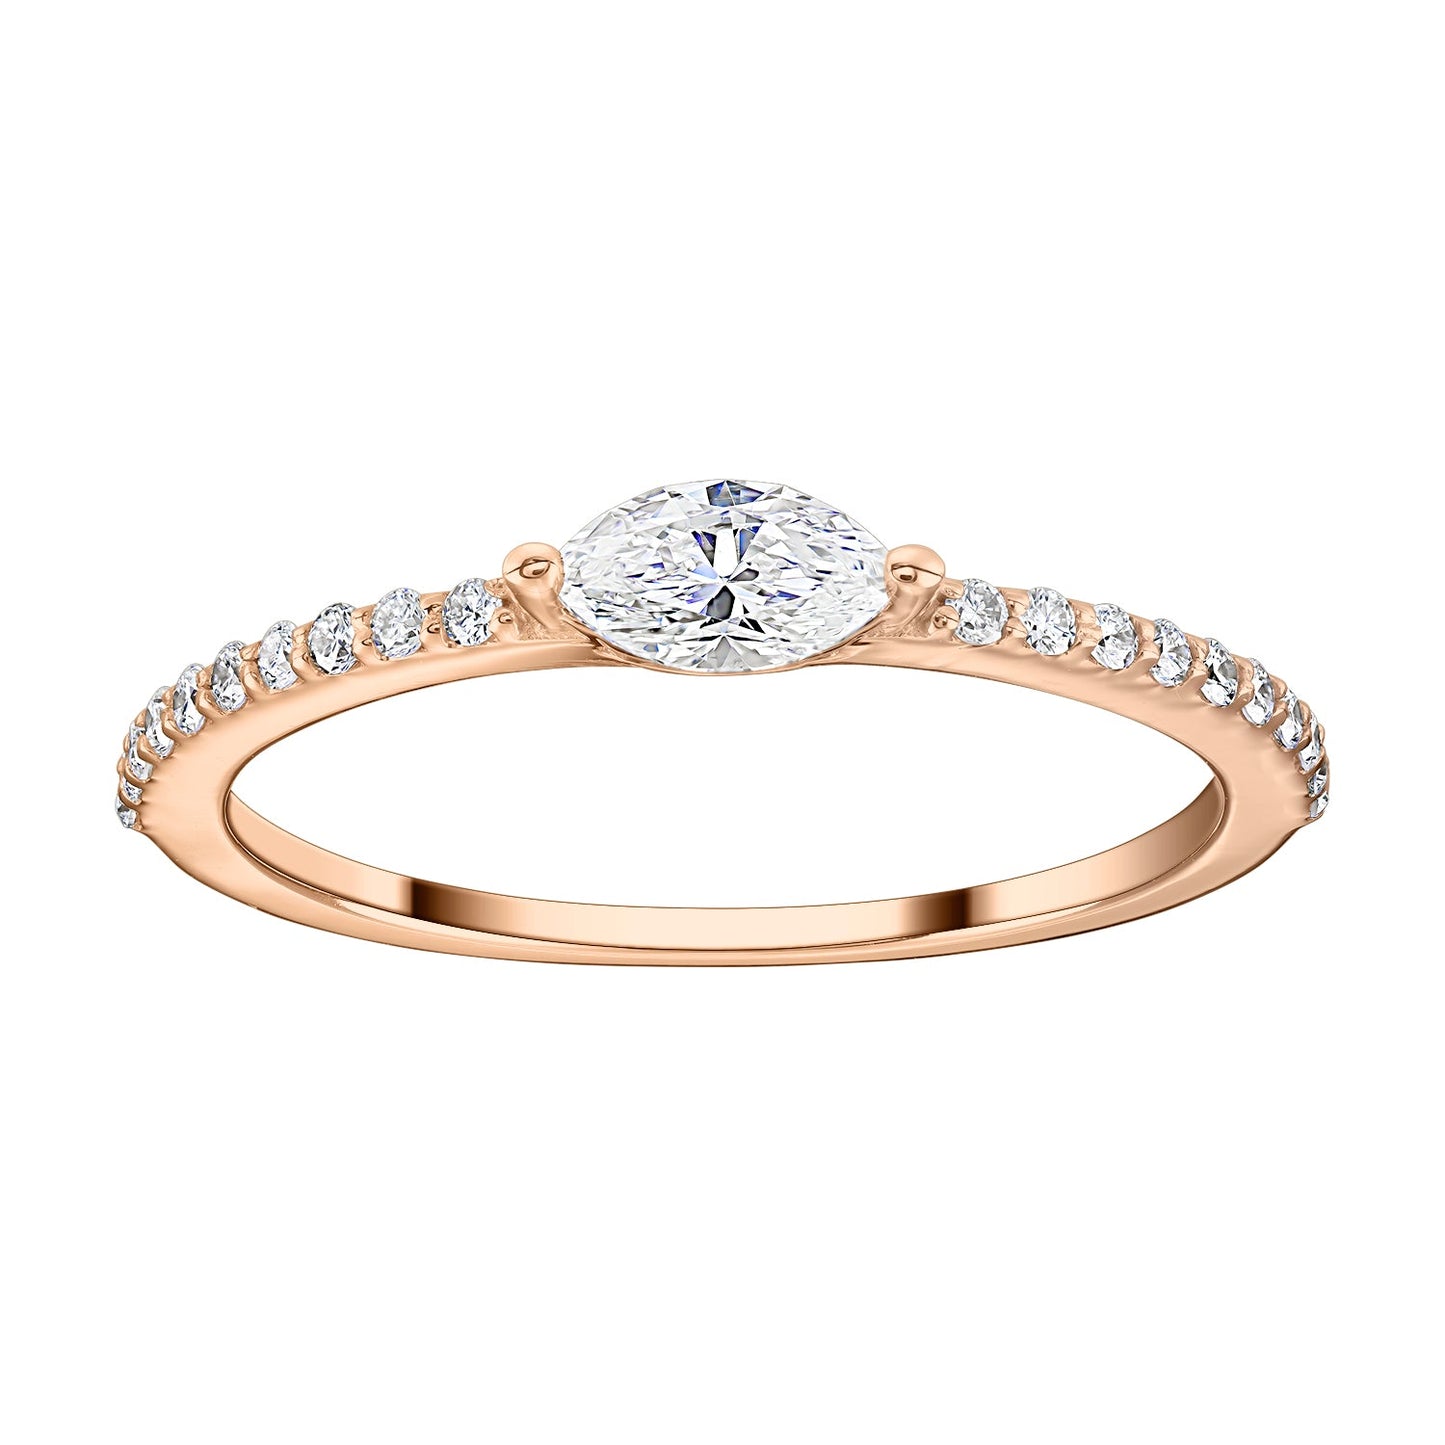 Gold Ring 14K (585) Mirage with Diamonds 0.35 ct - Pink